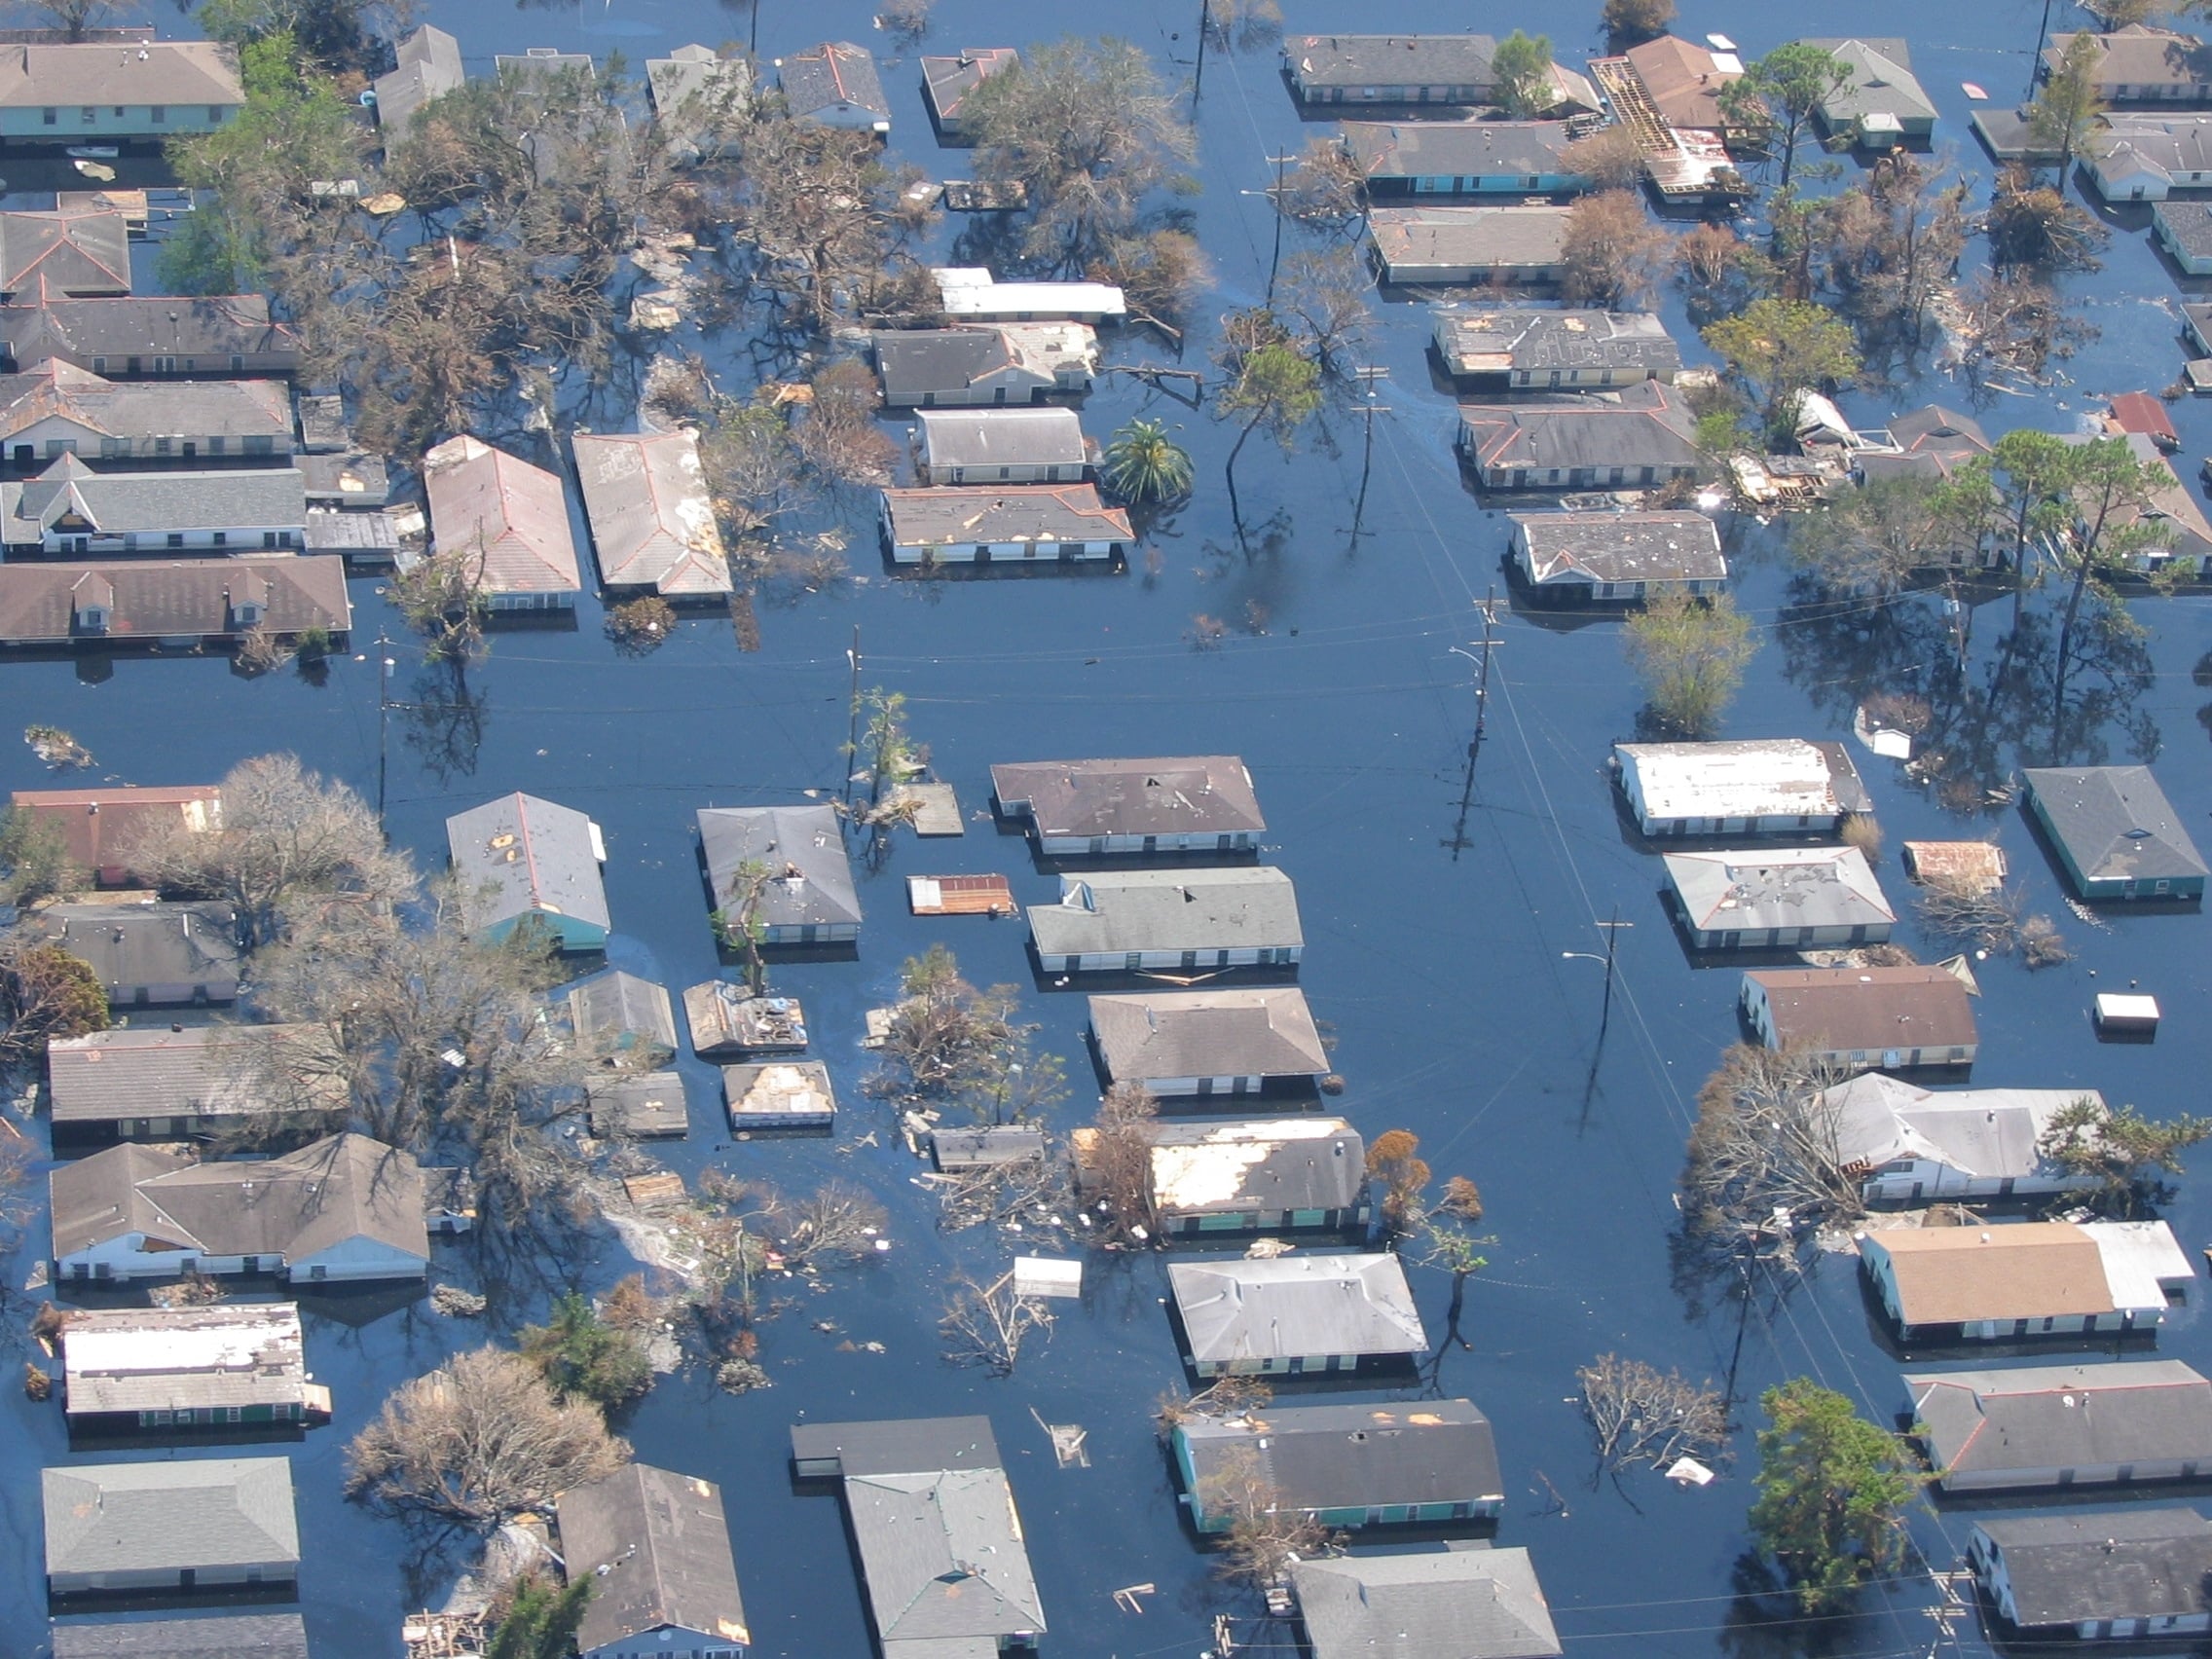 View of a flooded neighborhood from above. Tops of houses are just visible over the water level.